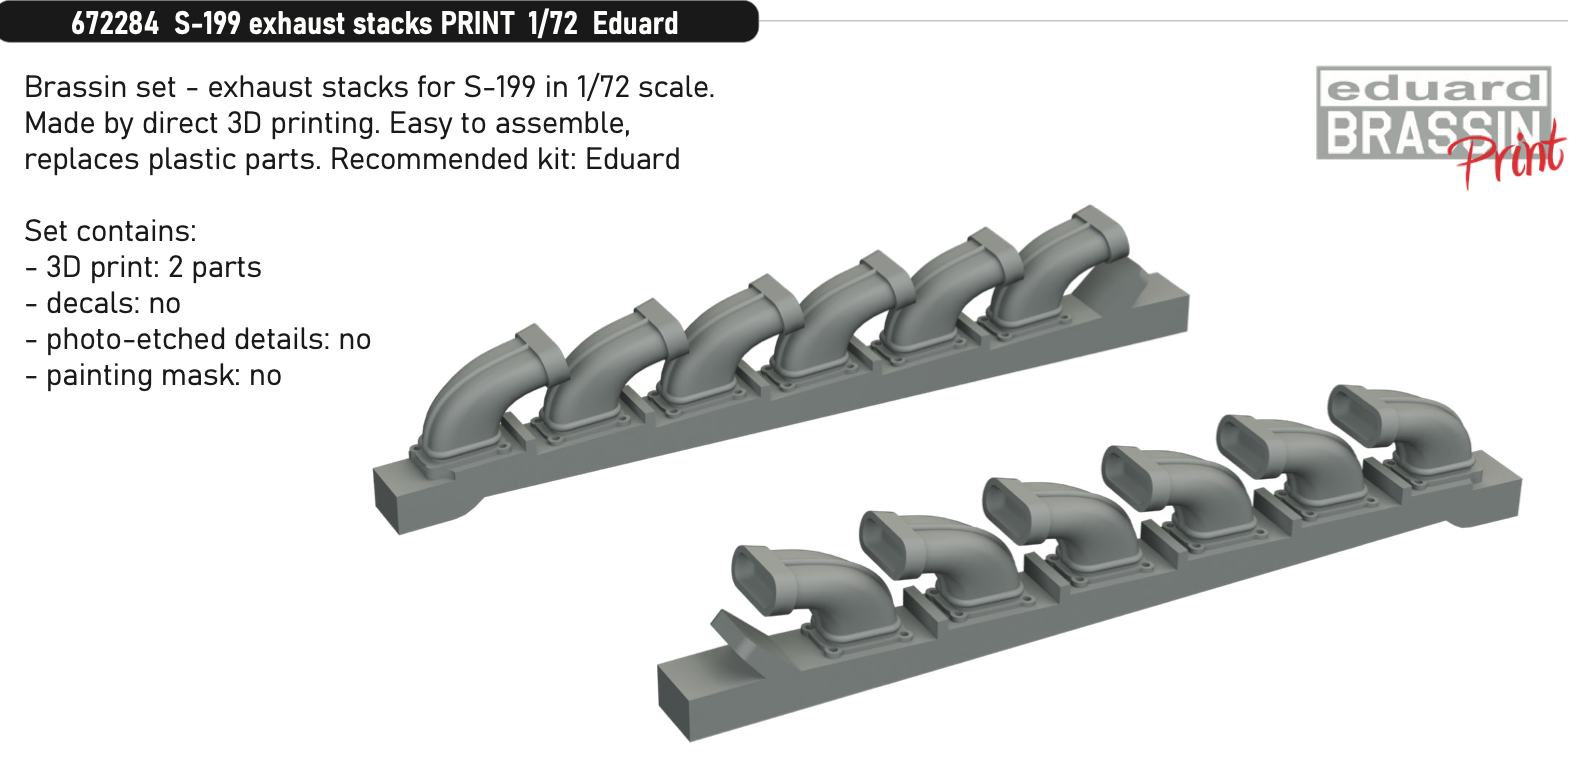 Additions (3D resin printing) 1/72 Avia S-199 exhaust stacks 3D-Printed (designed to be used with Eduard kits) 